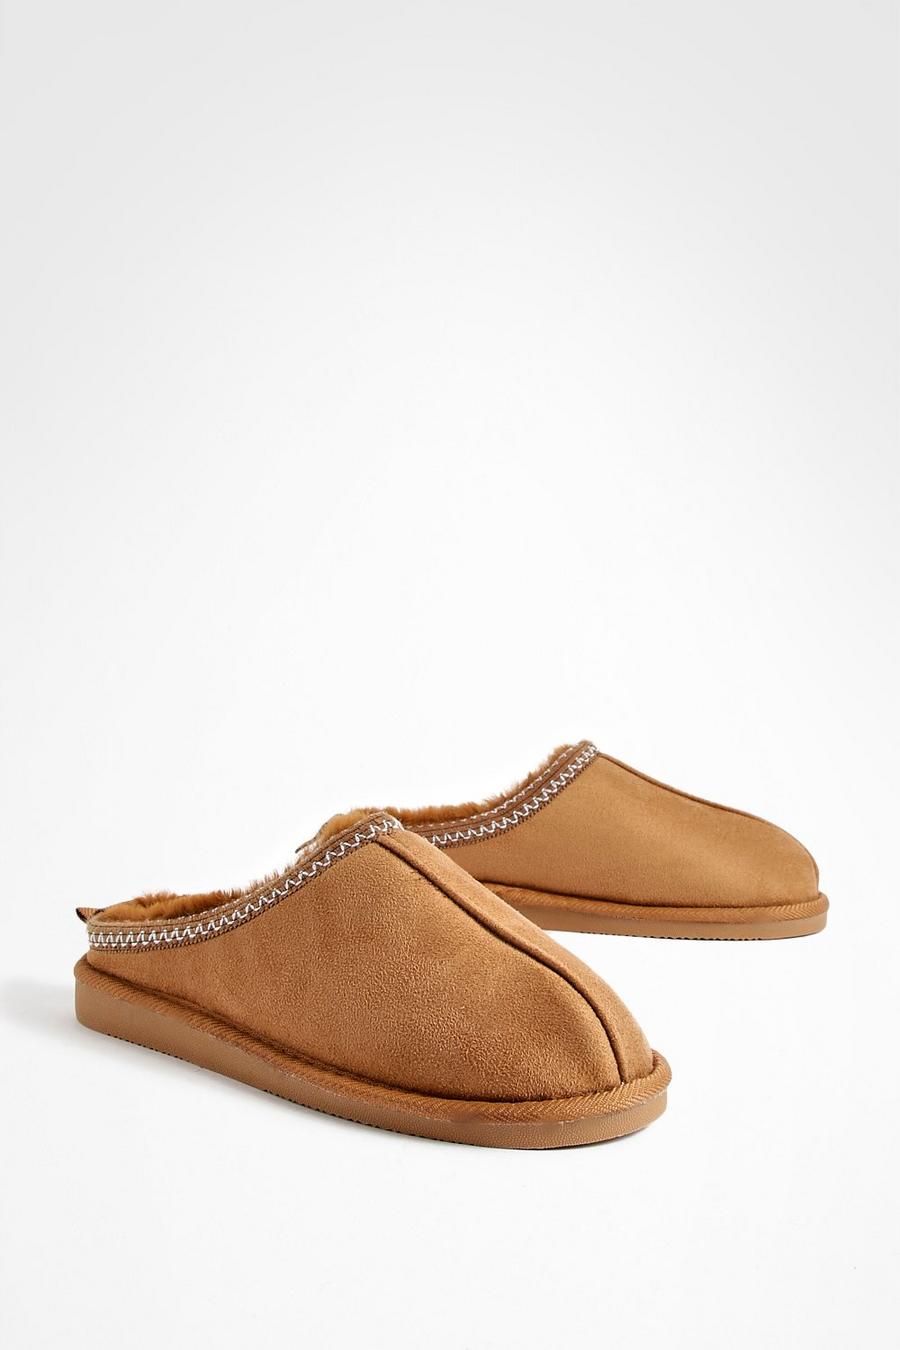 Chestnut Embroidered Slip On Cozy Mules